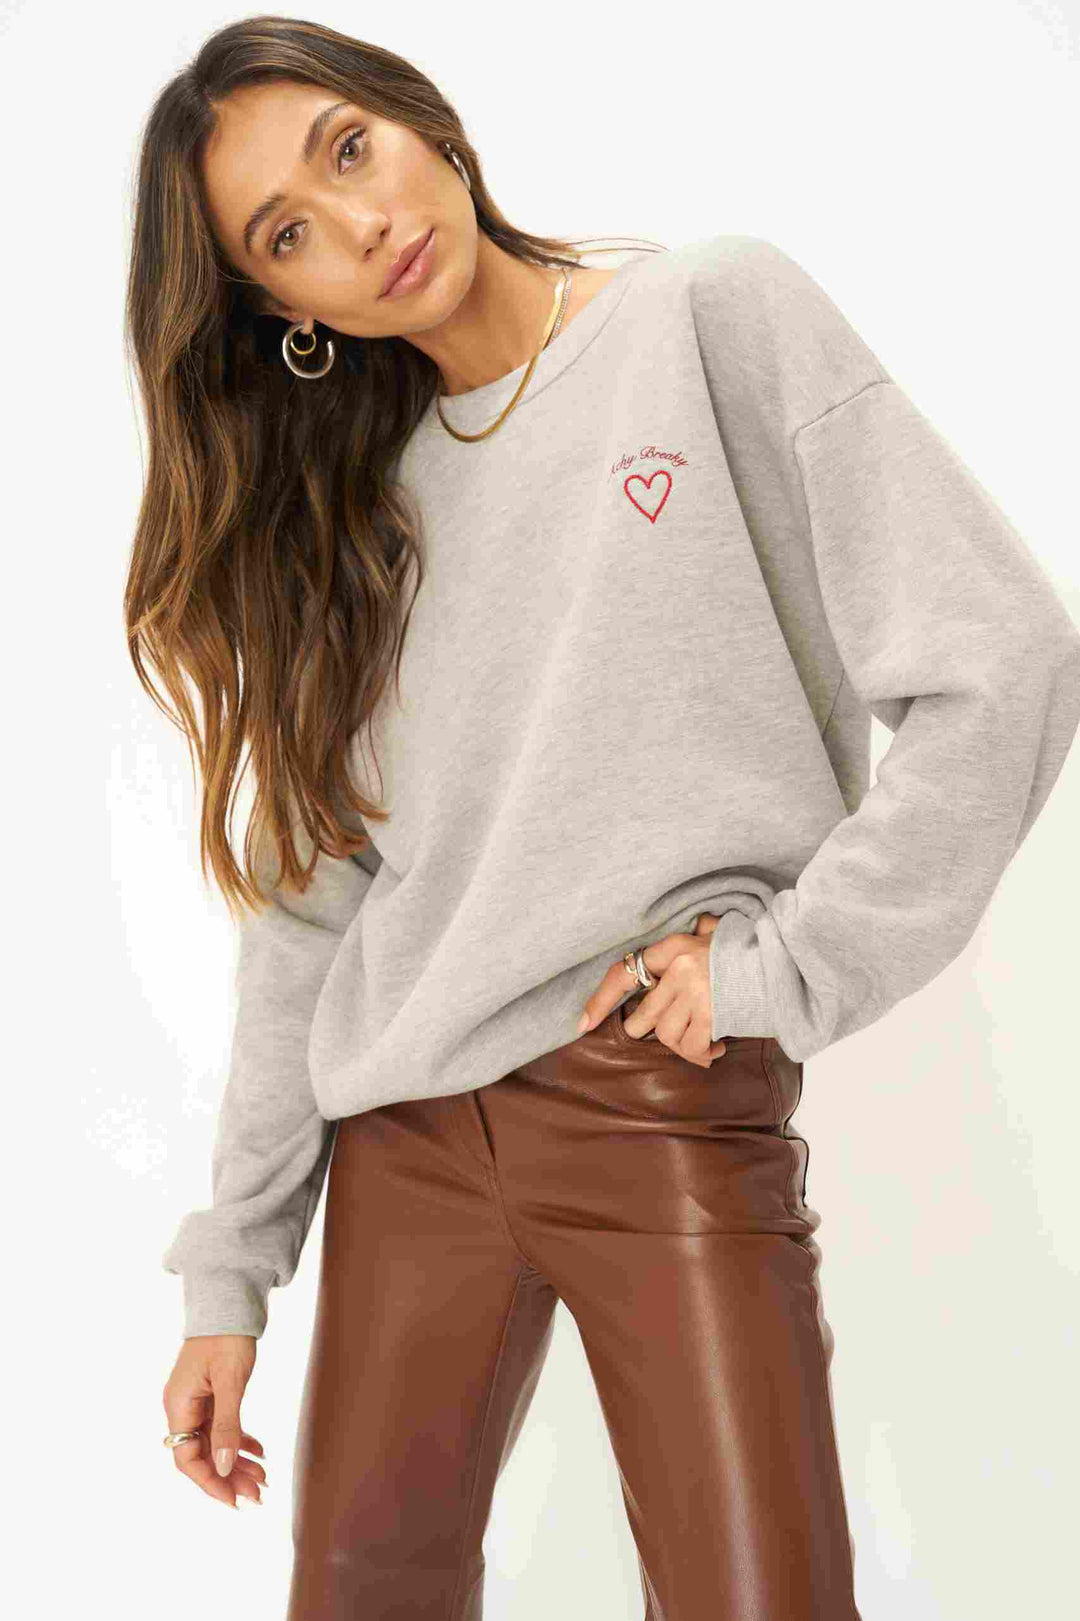 ACHY BREAKY EMBROIDERED SWEATSHIRT-HEATHER GREY - Kingfisher Road - Online Boutique